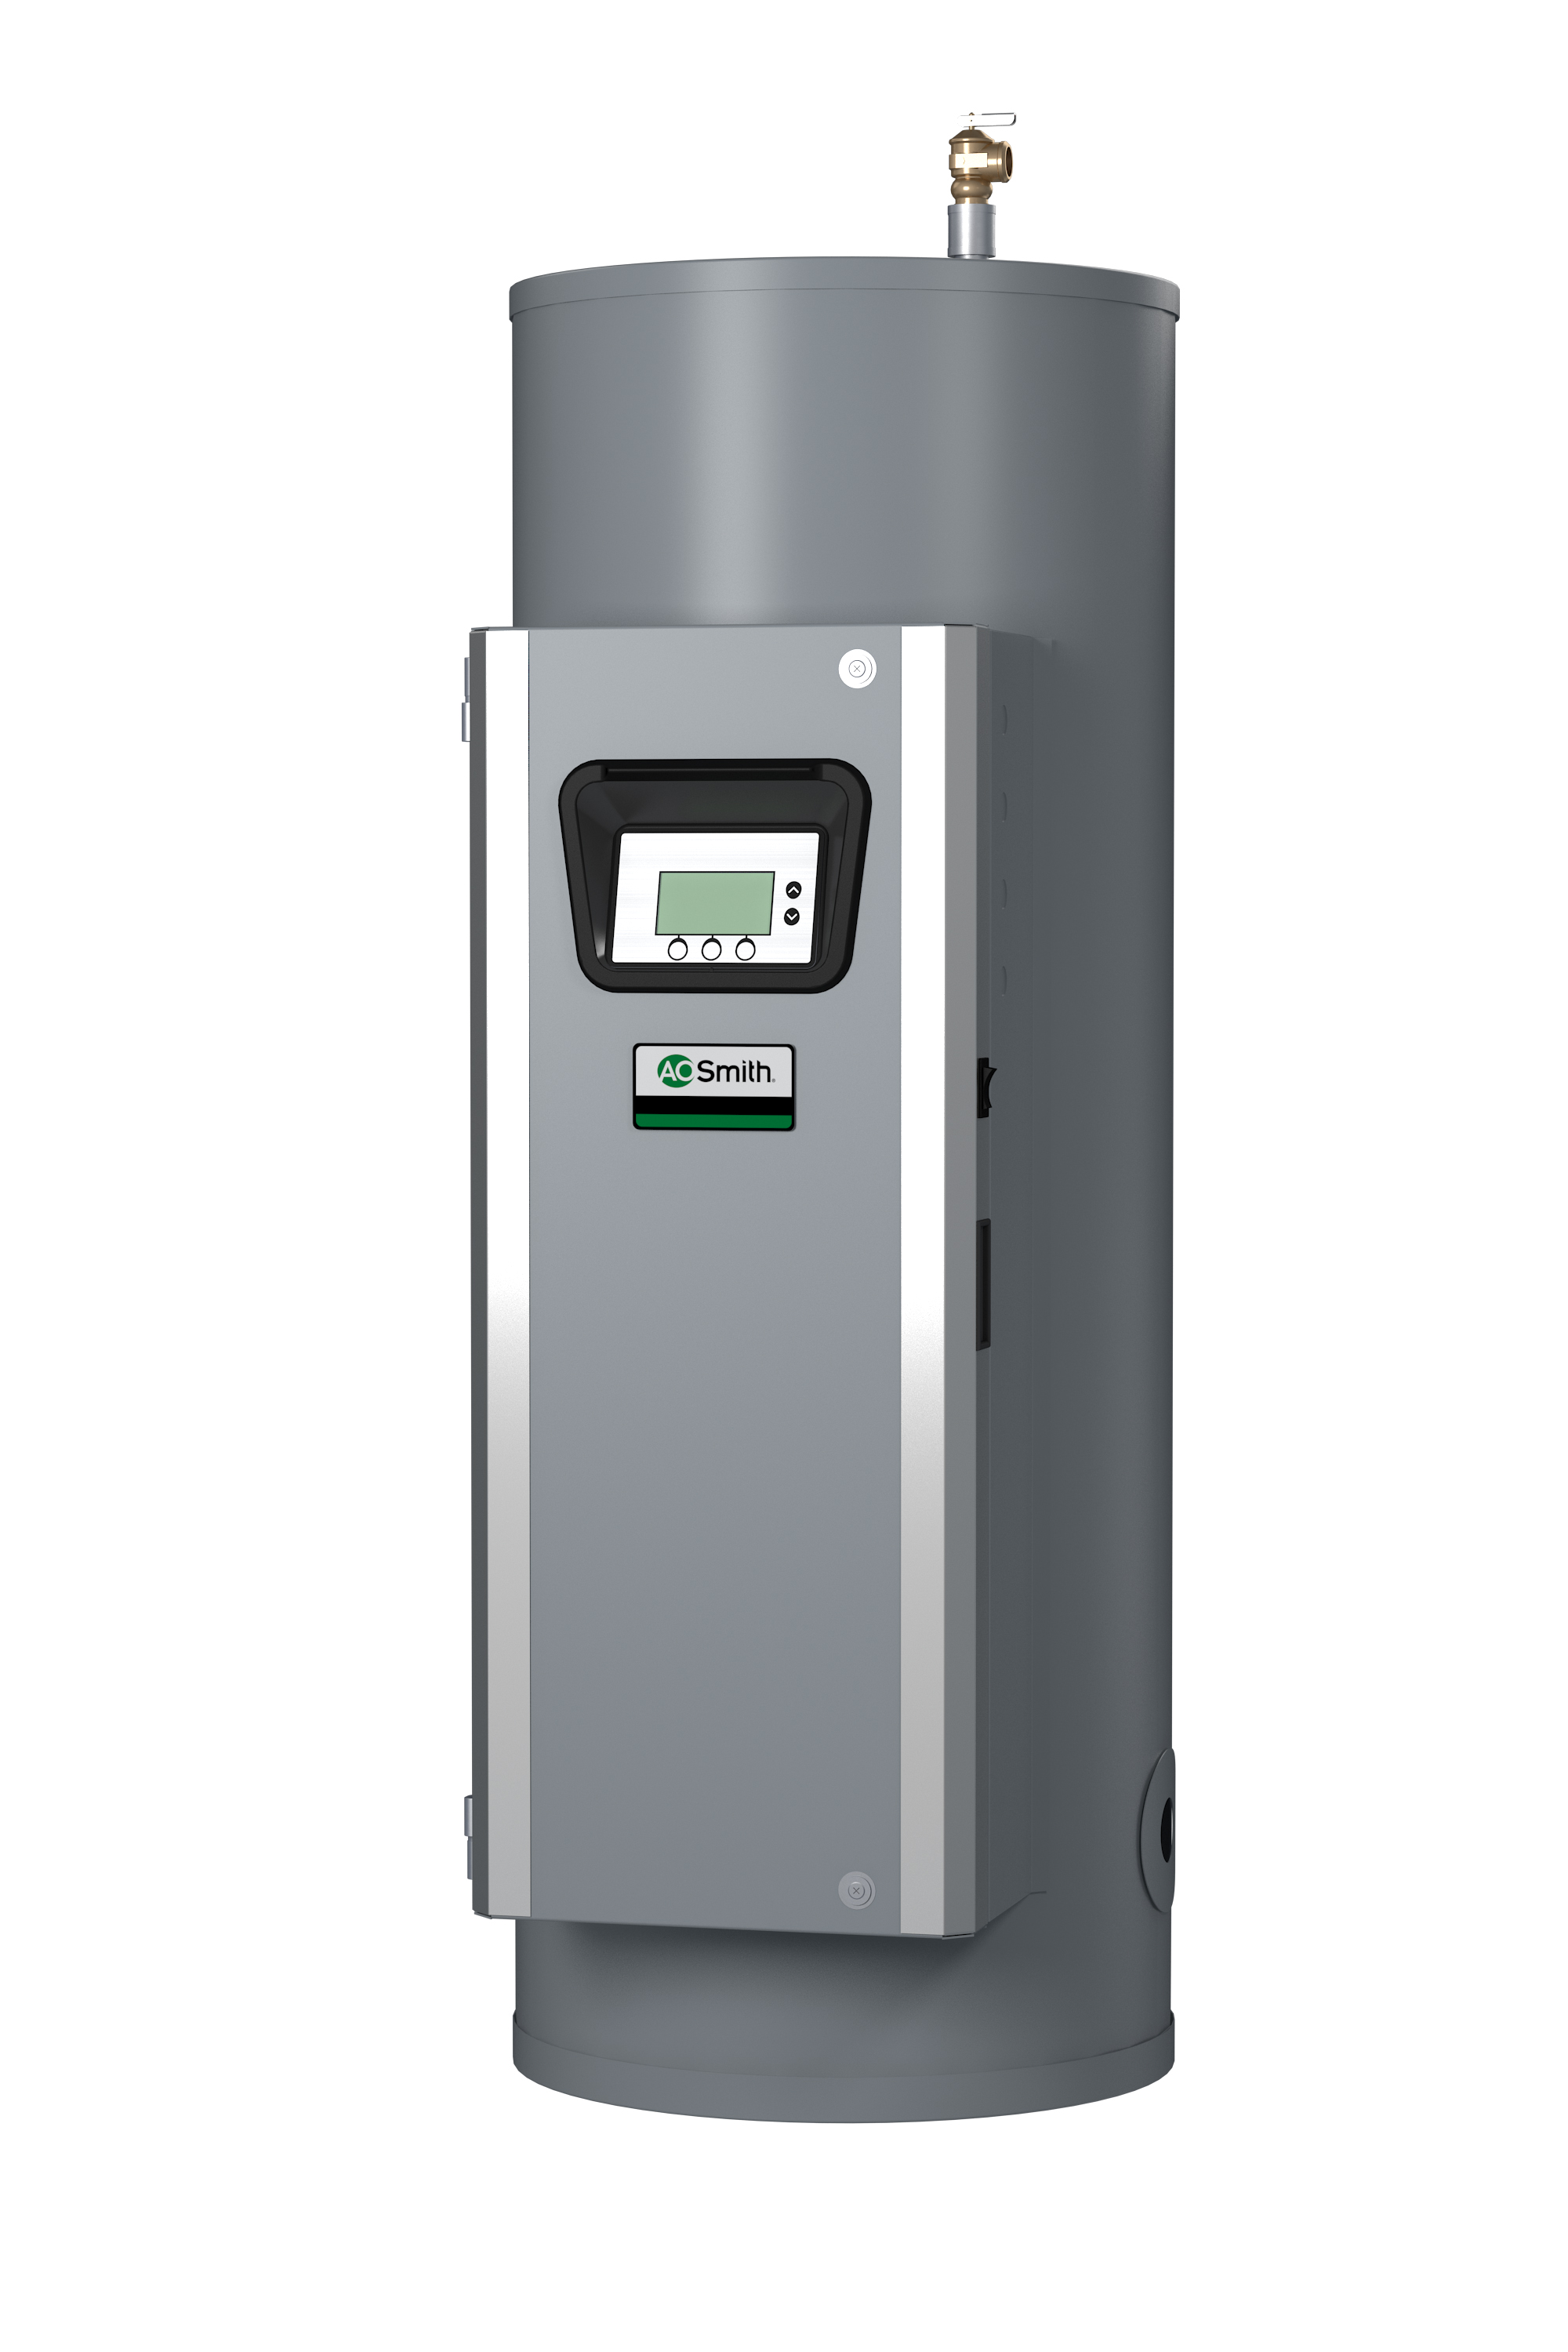 AO SMITH DSE-100A-30, 100 GALLONS, 30KW, 480 VOLT, 62.5 AMPS, 1 PHASE, 2 ELEMENTS, ASME CUSTOM Xi SERIES HEAVY DUTY COMMERCIAL ELECTRIC WATER HEATER